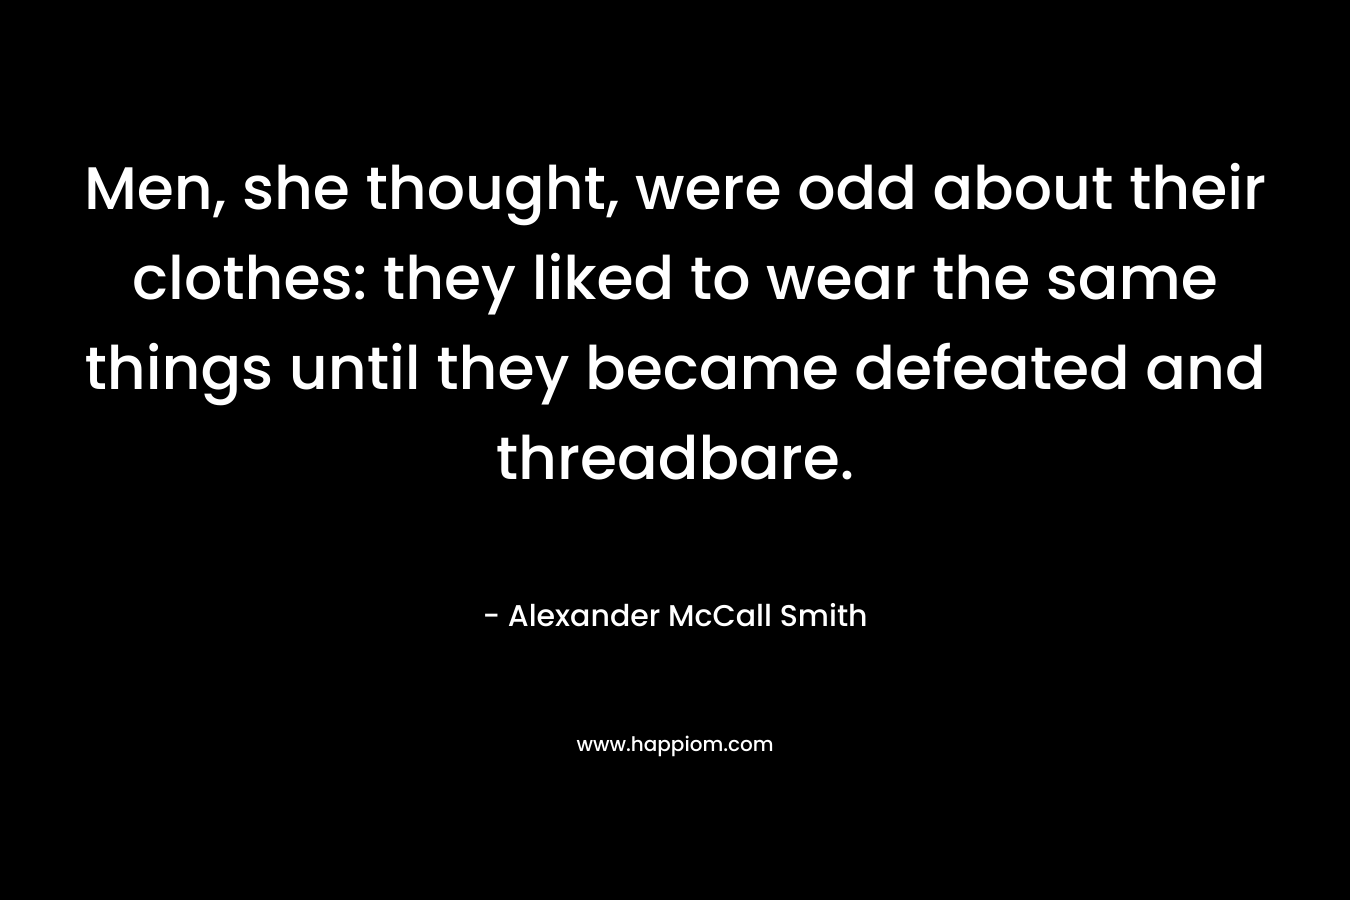 Men, she thought, were odd about their clothes: they liked to wear the same things until they became defeated and threadbare.